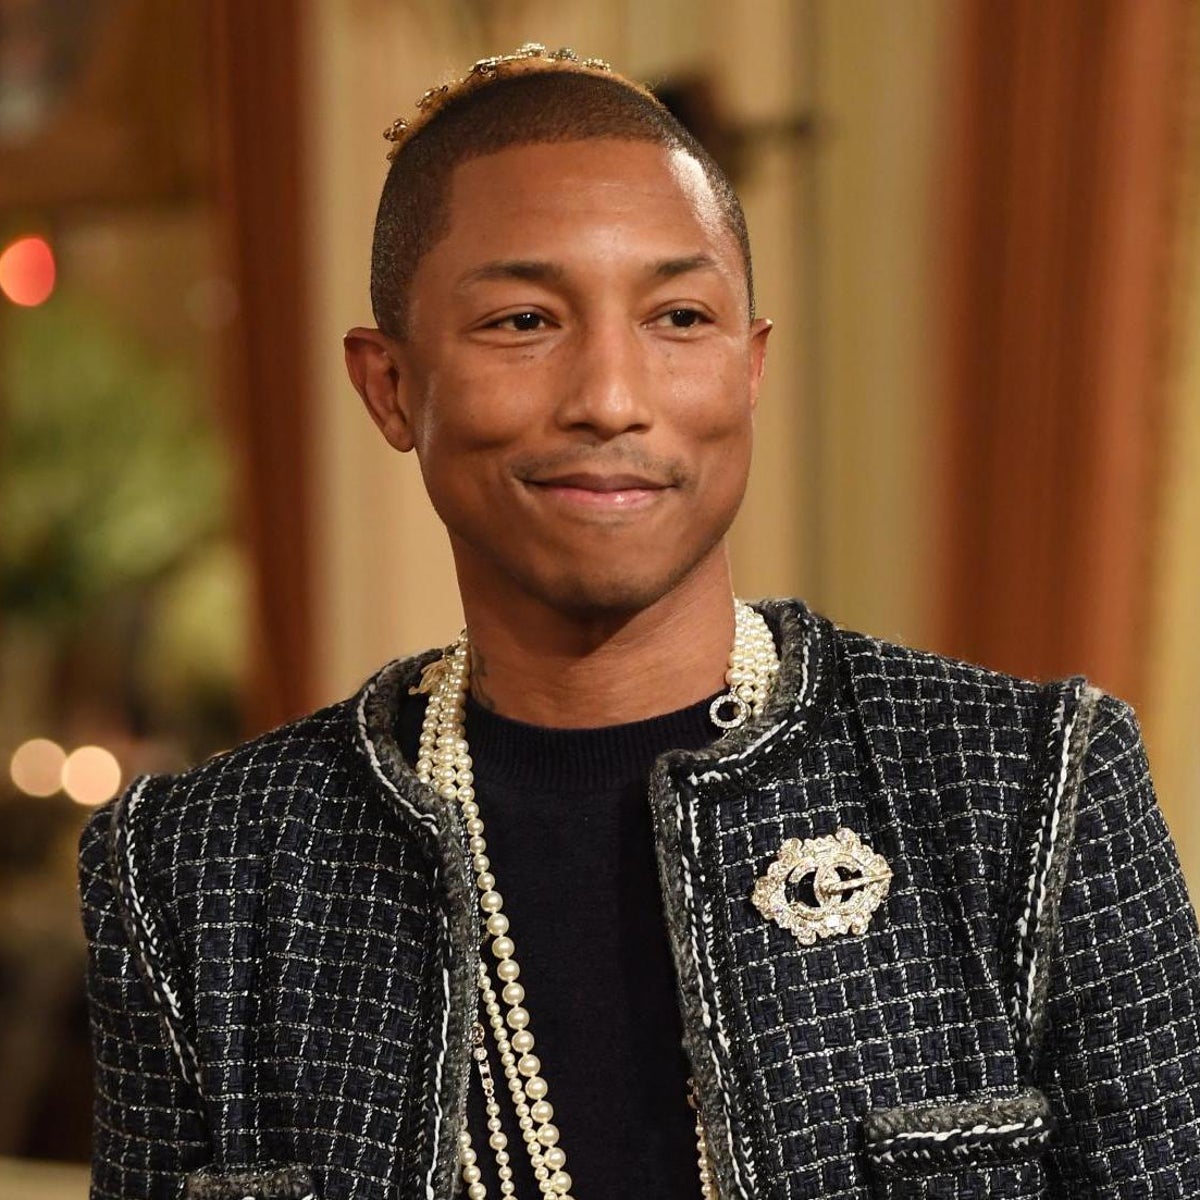 Pharrell Williams teases new Chanel collaboration in short film